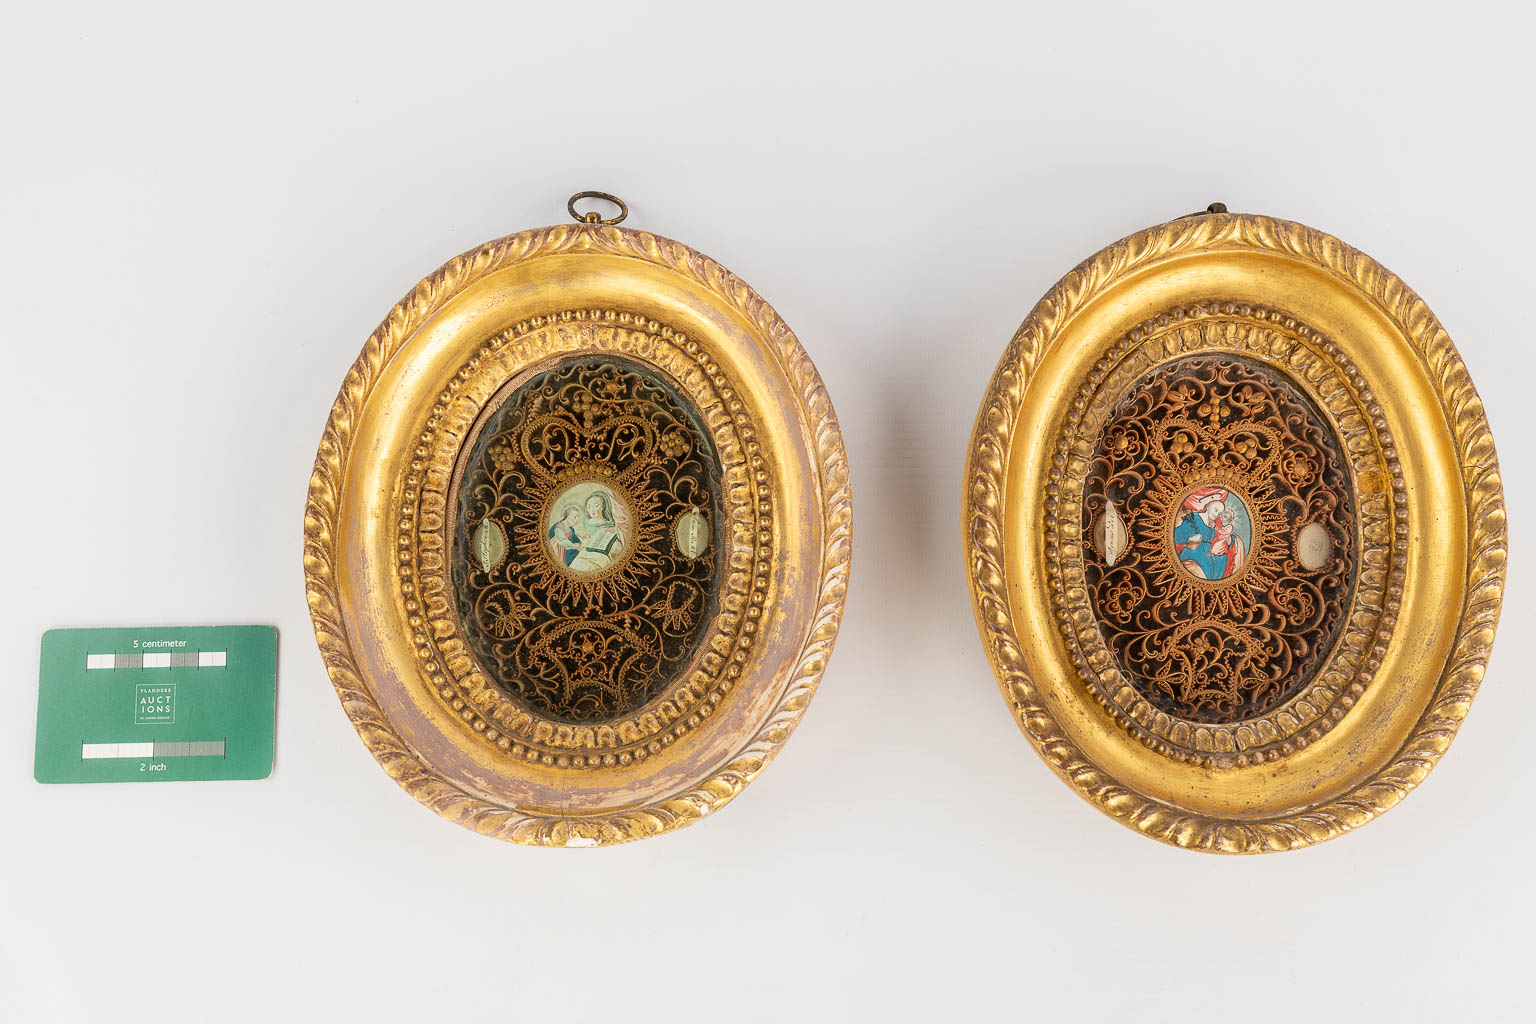 A pair of framed relics, decorated with images of Mary and Joseph with child. 19th C. (W: 19 x H: 23 cm)